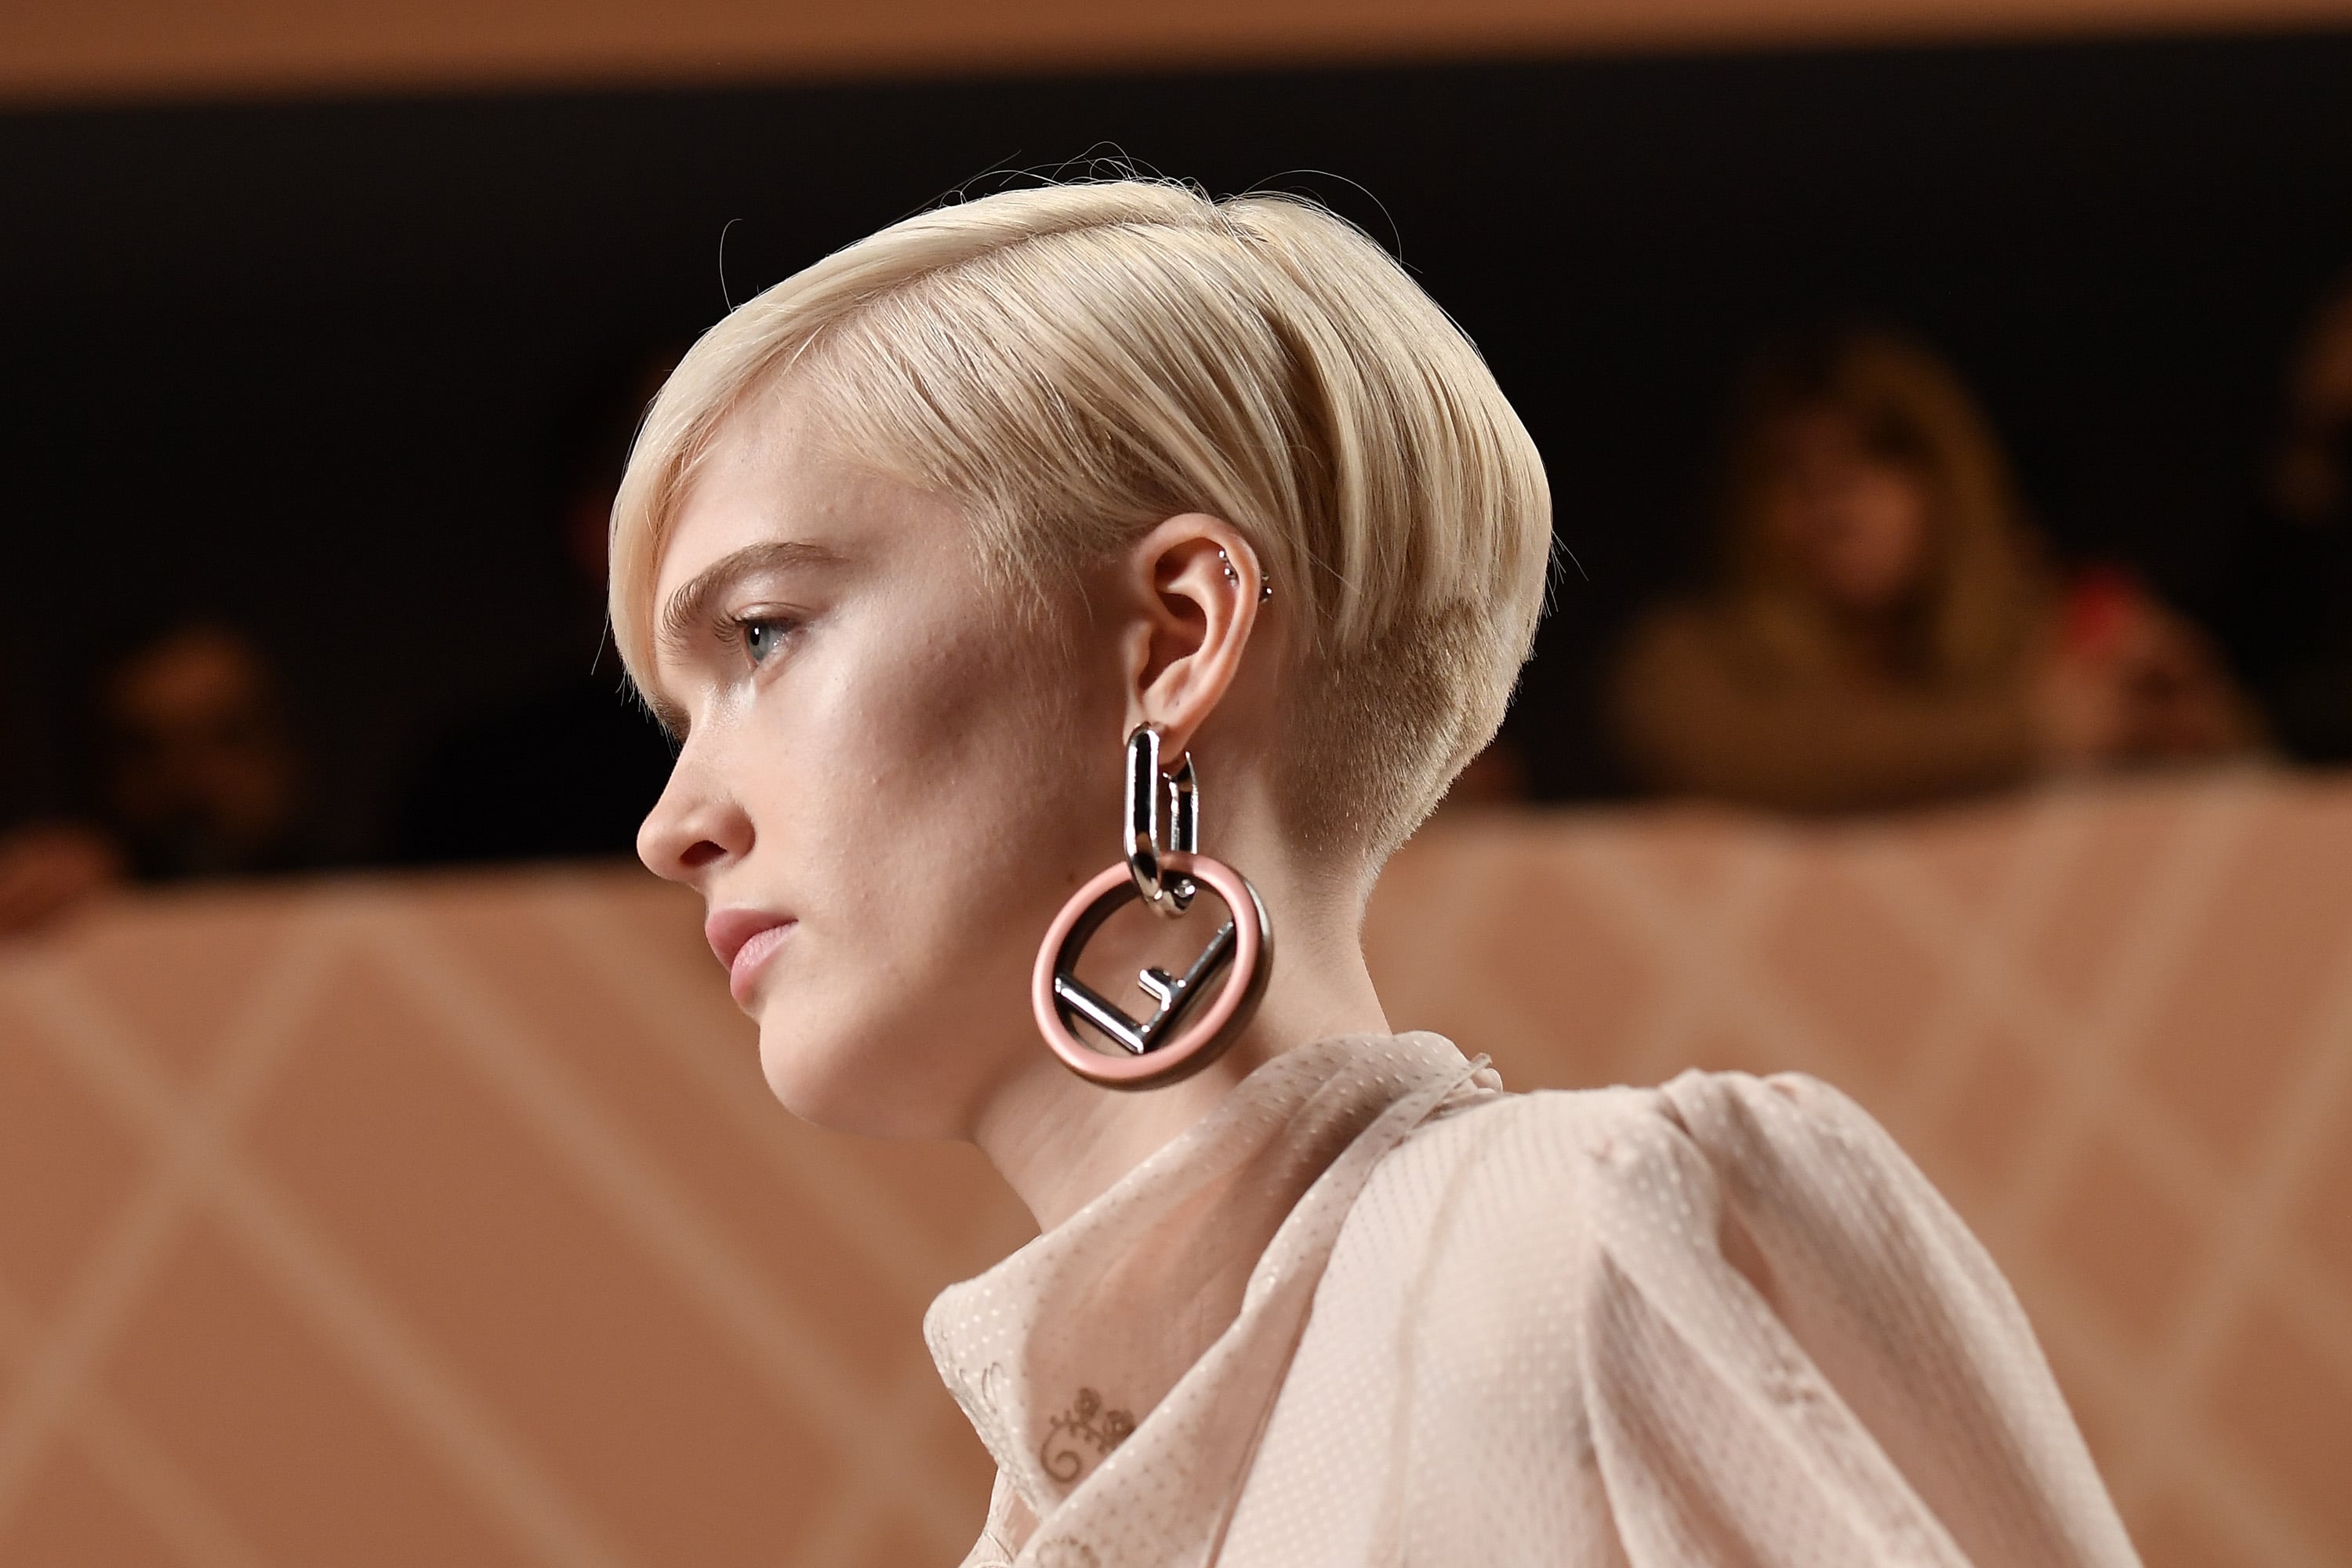 From oversized discs to gold hoops: Fall 2018’s earring trends decoded